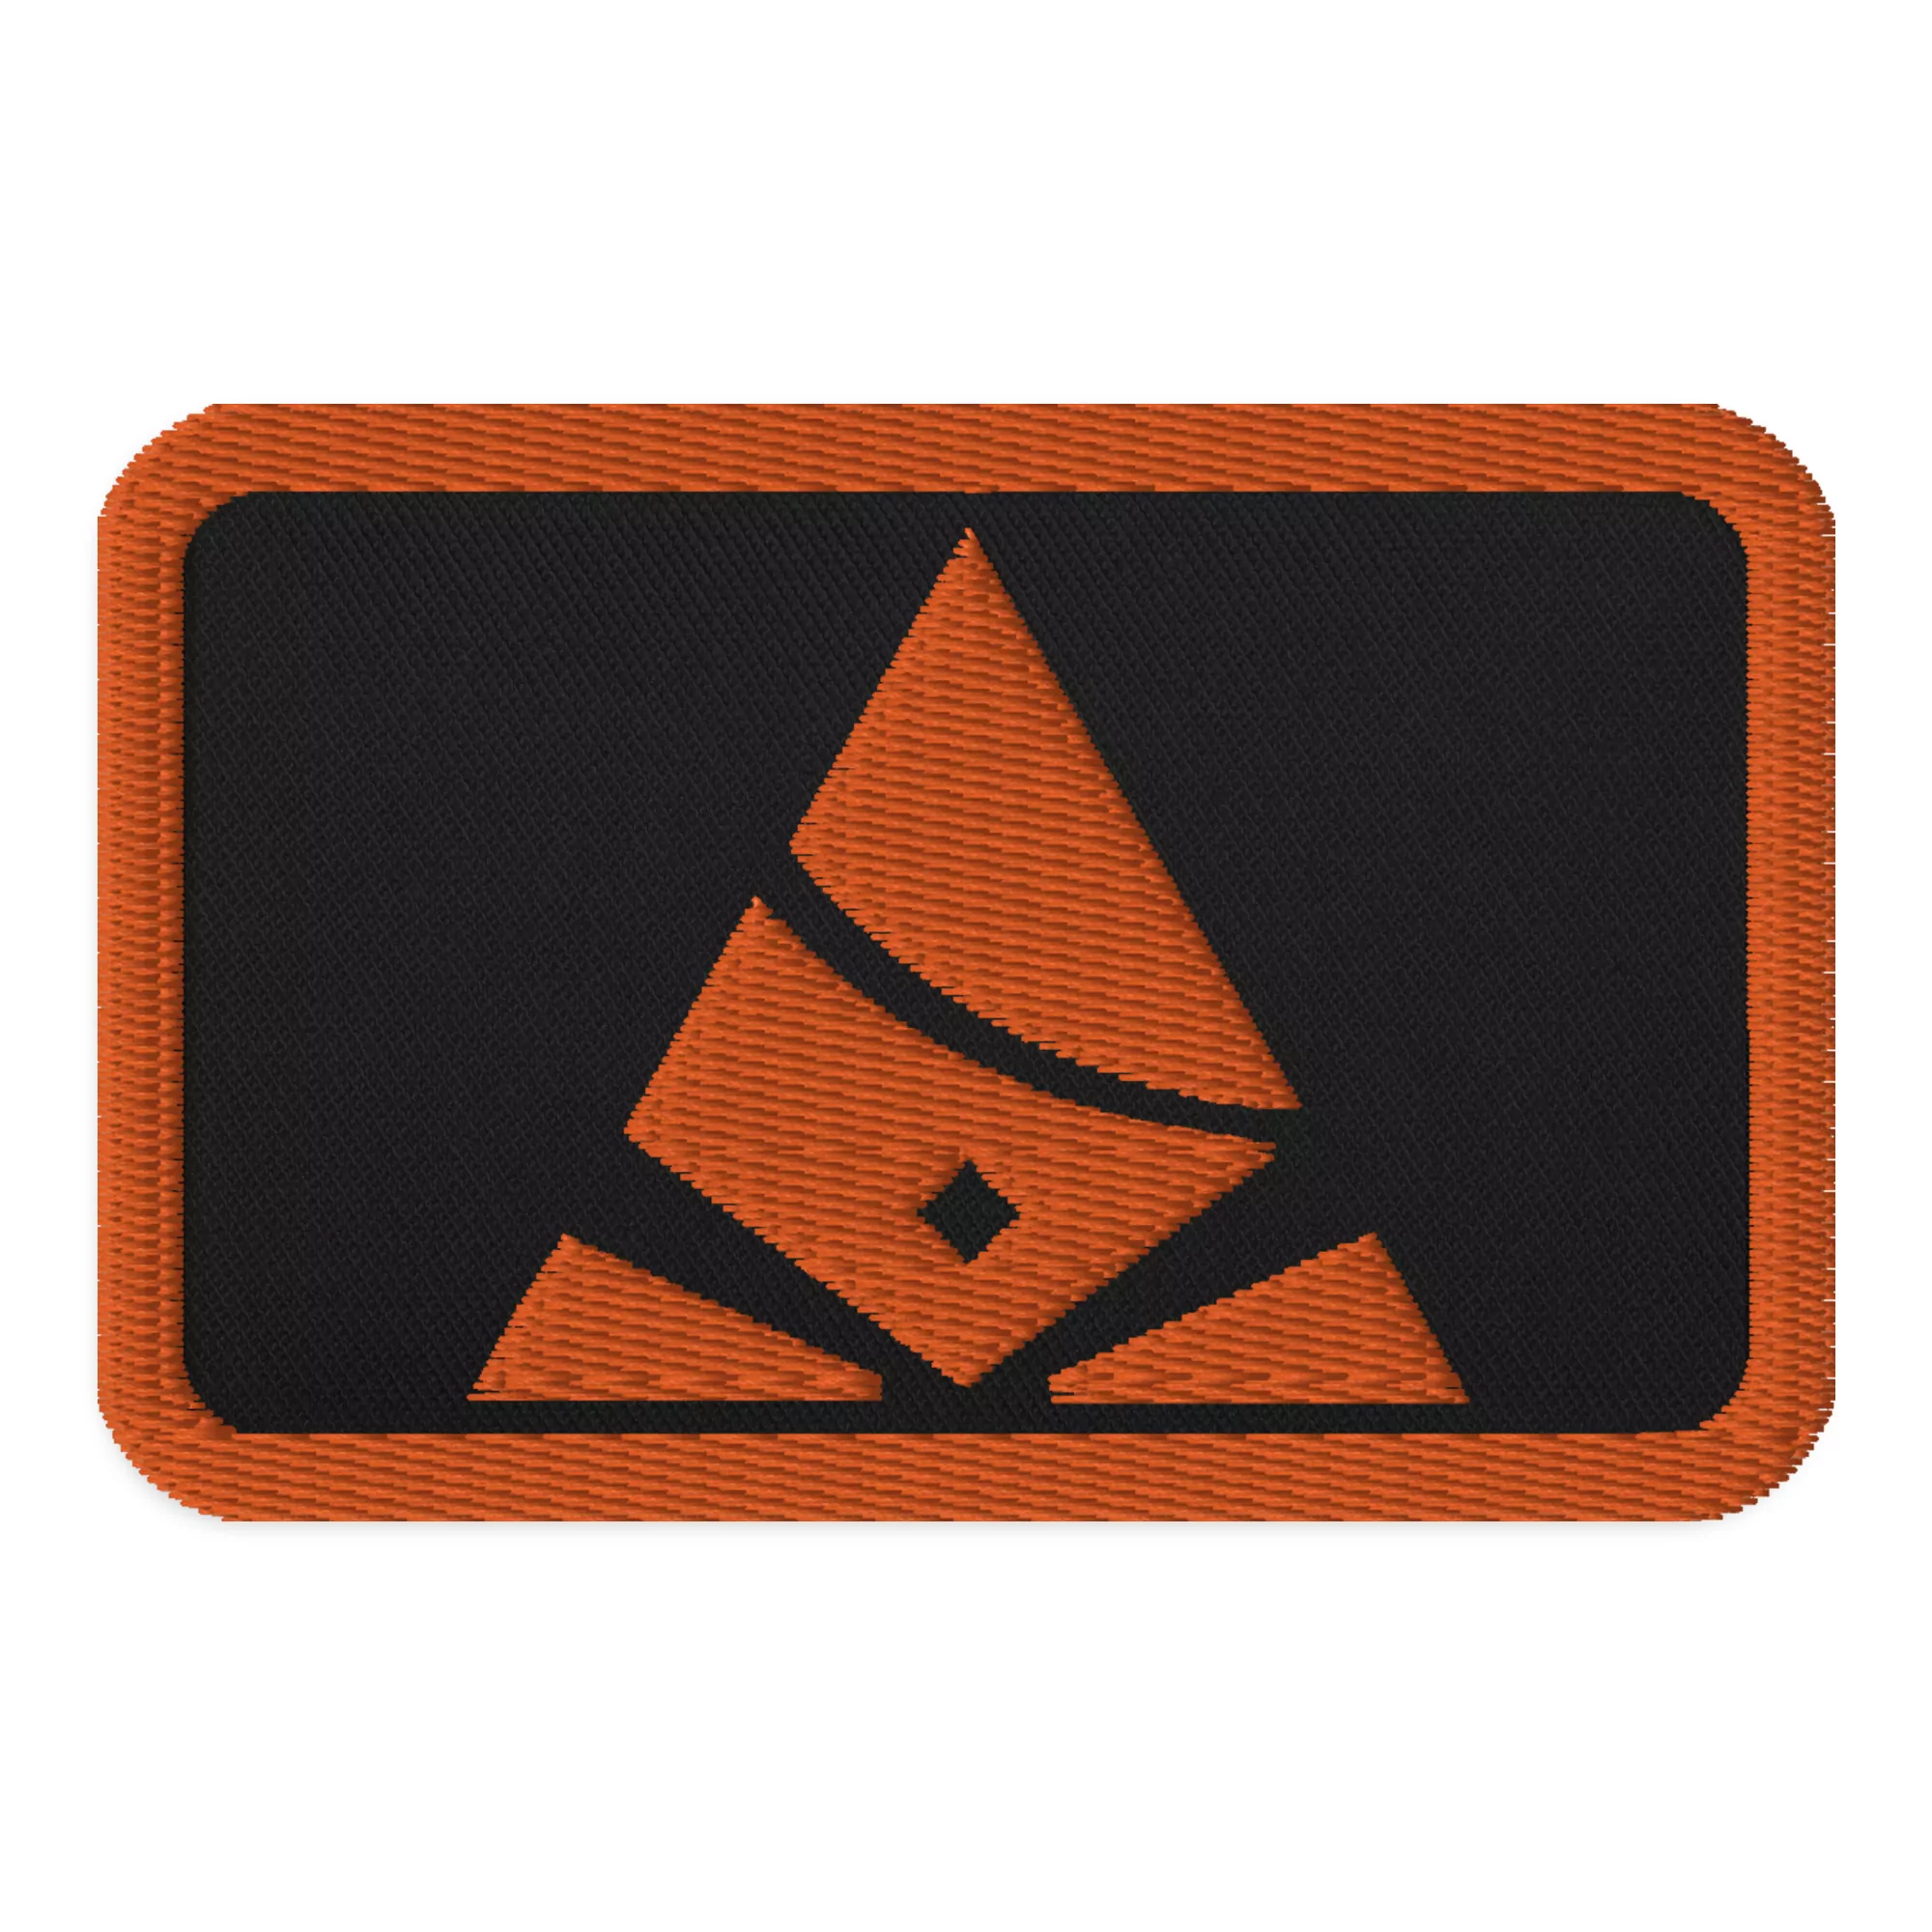 Embroidered Patch with Bank of Zaonce logo in orange